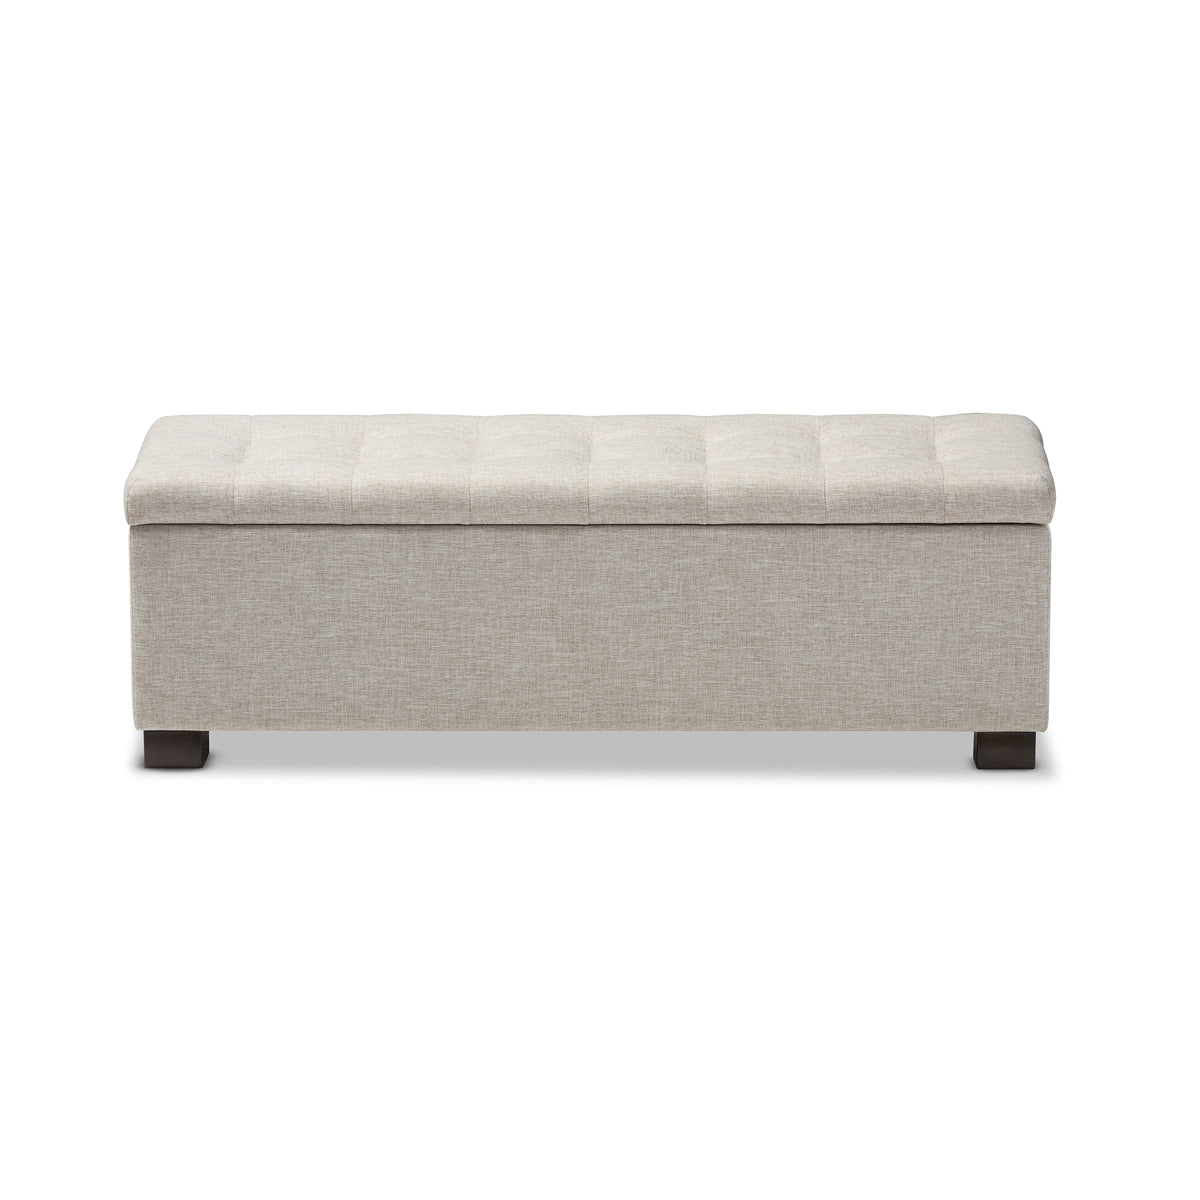 Baxton Studio Roanoke Modern and Contemporary Beige Fabric Upholstered Grid-Tufting Storage Ottoman Bench Baxton Studio-benches-Minimal And Modern - 4